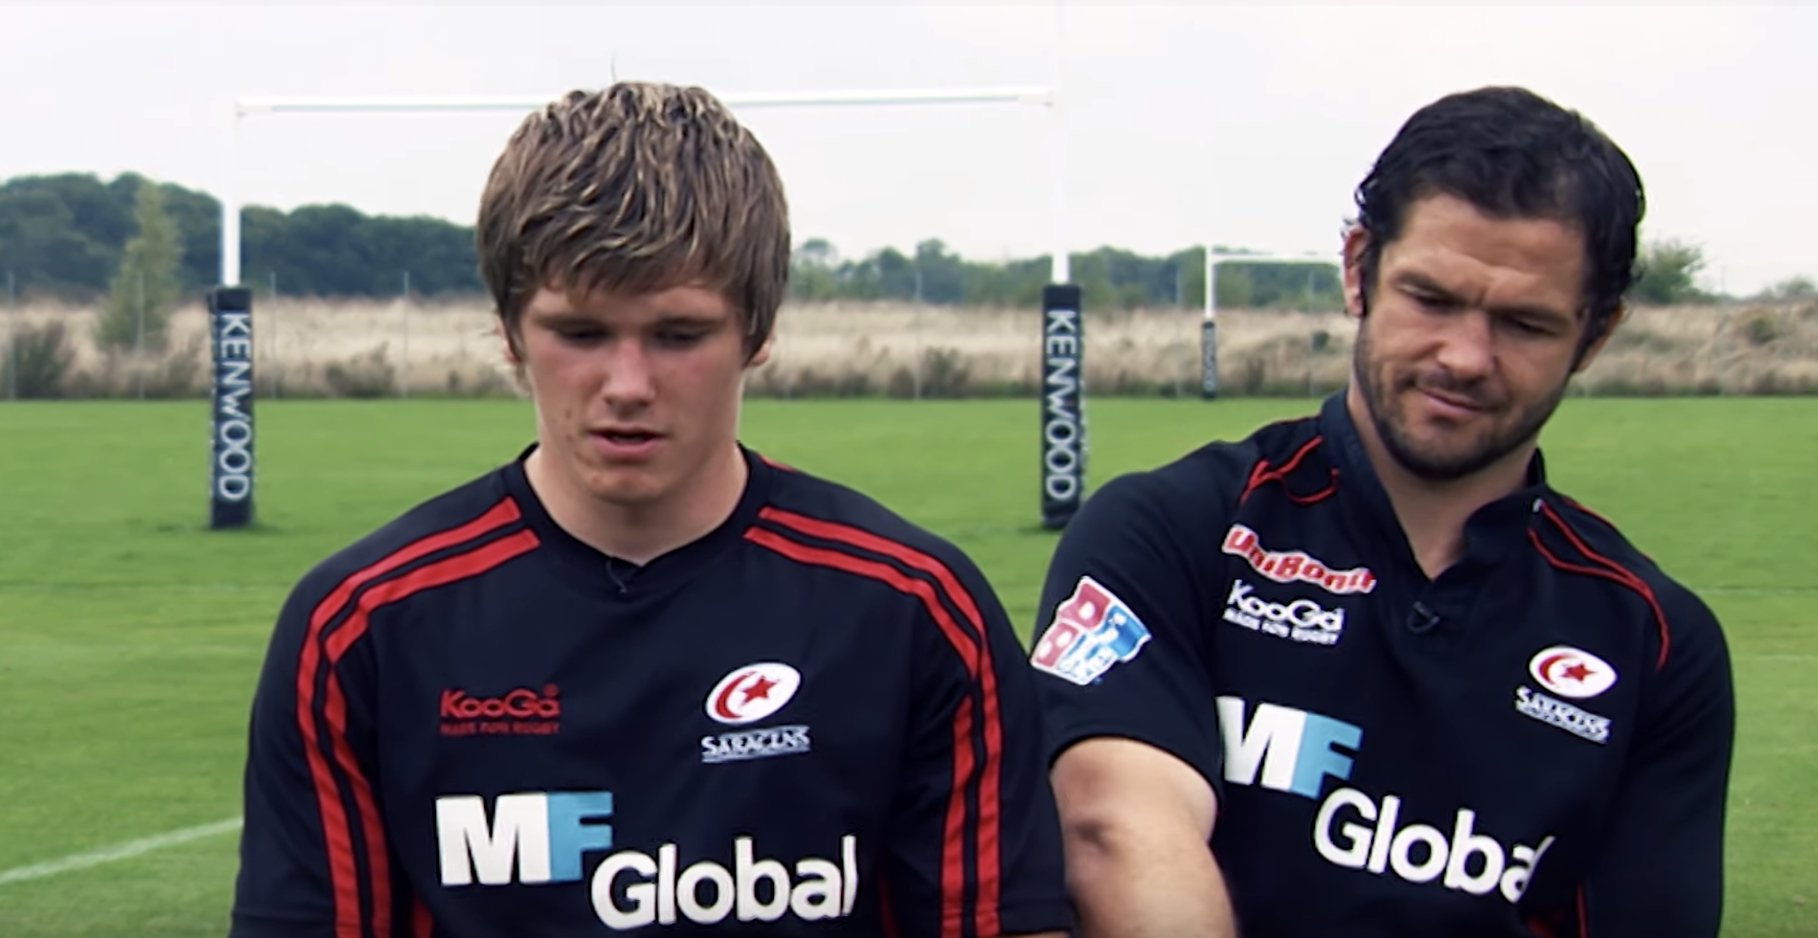 The incredible story of Owen Farrell's rugby debut at 17-years-old